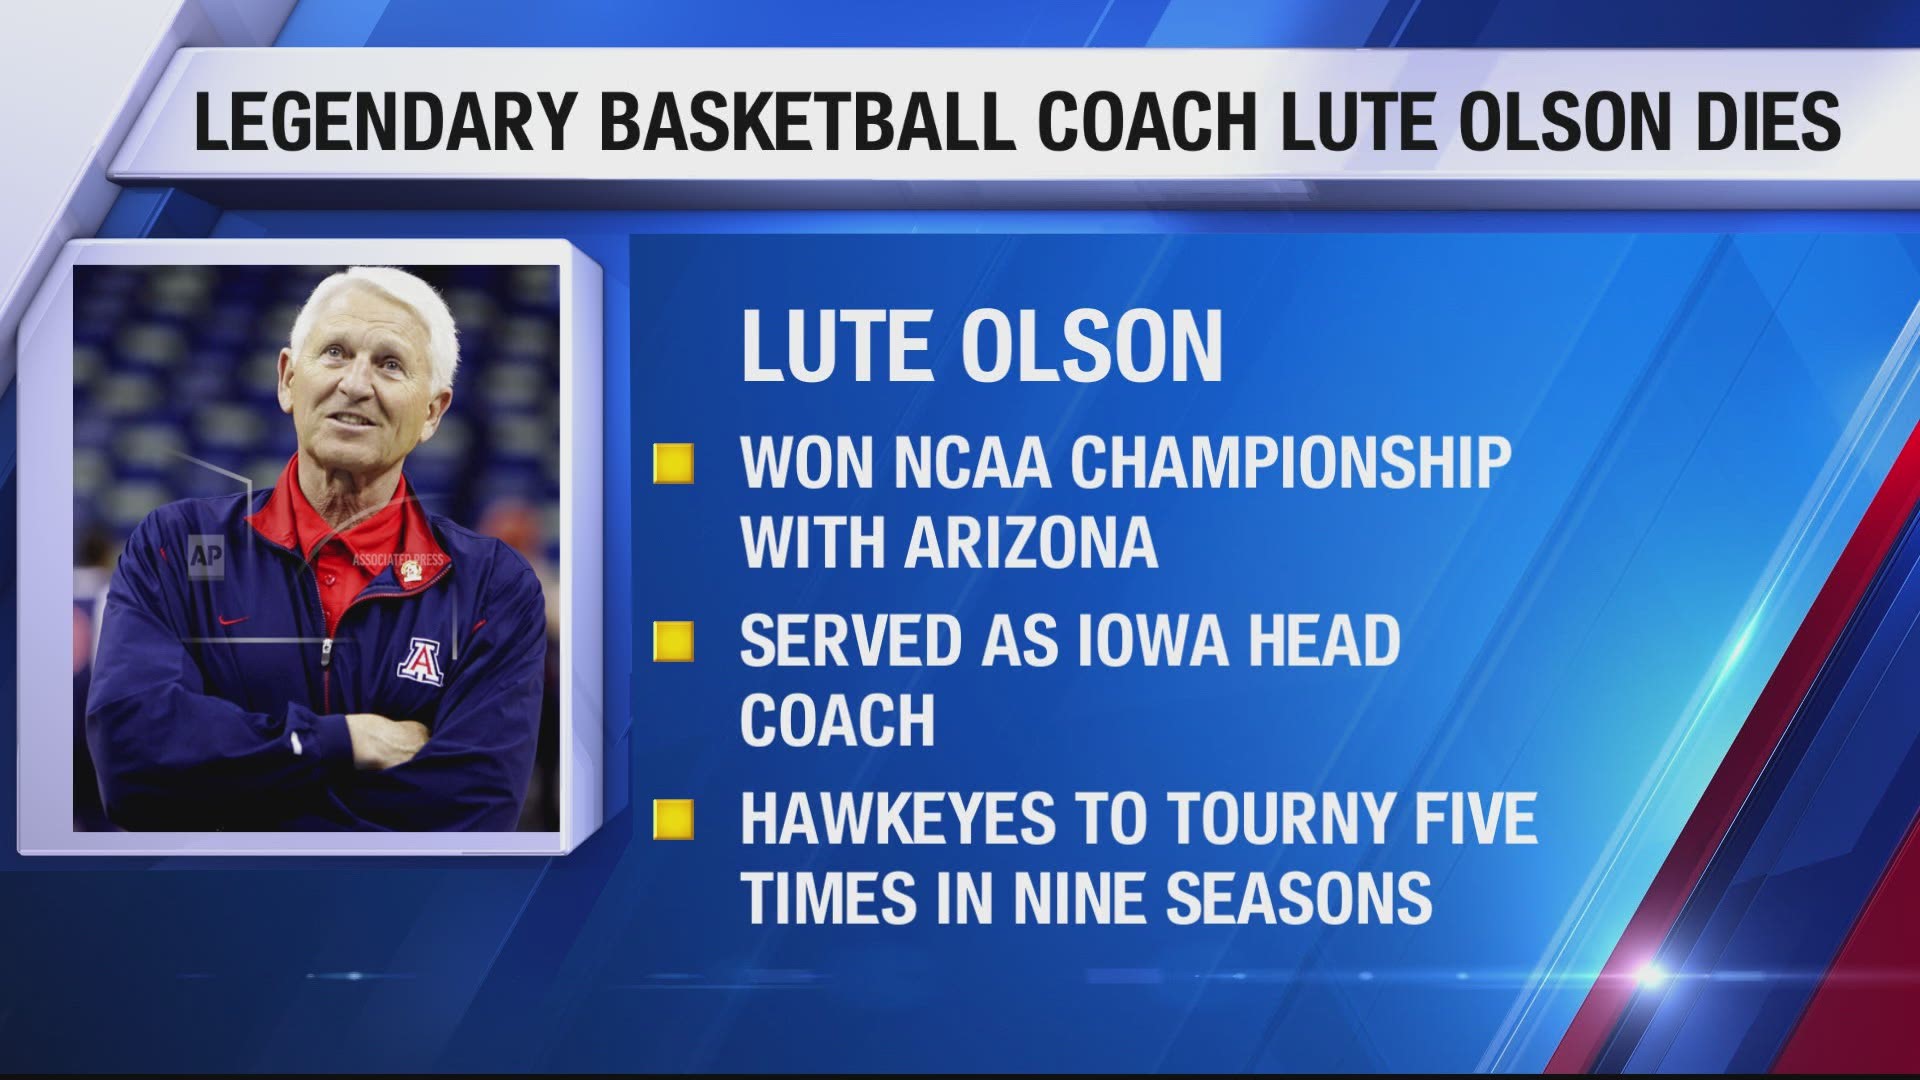 Lute Olson, the winningest coach in Hawkeye men's basketball history, passed away Thursday at the age of 85.